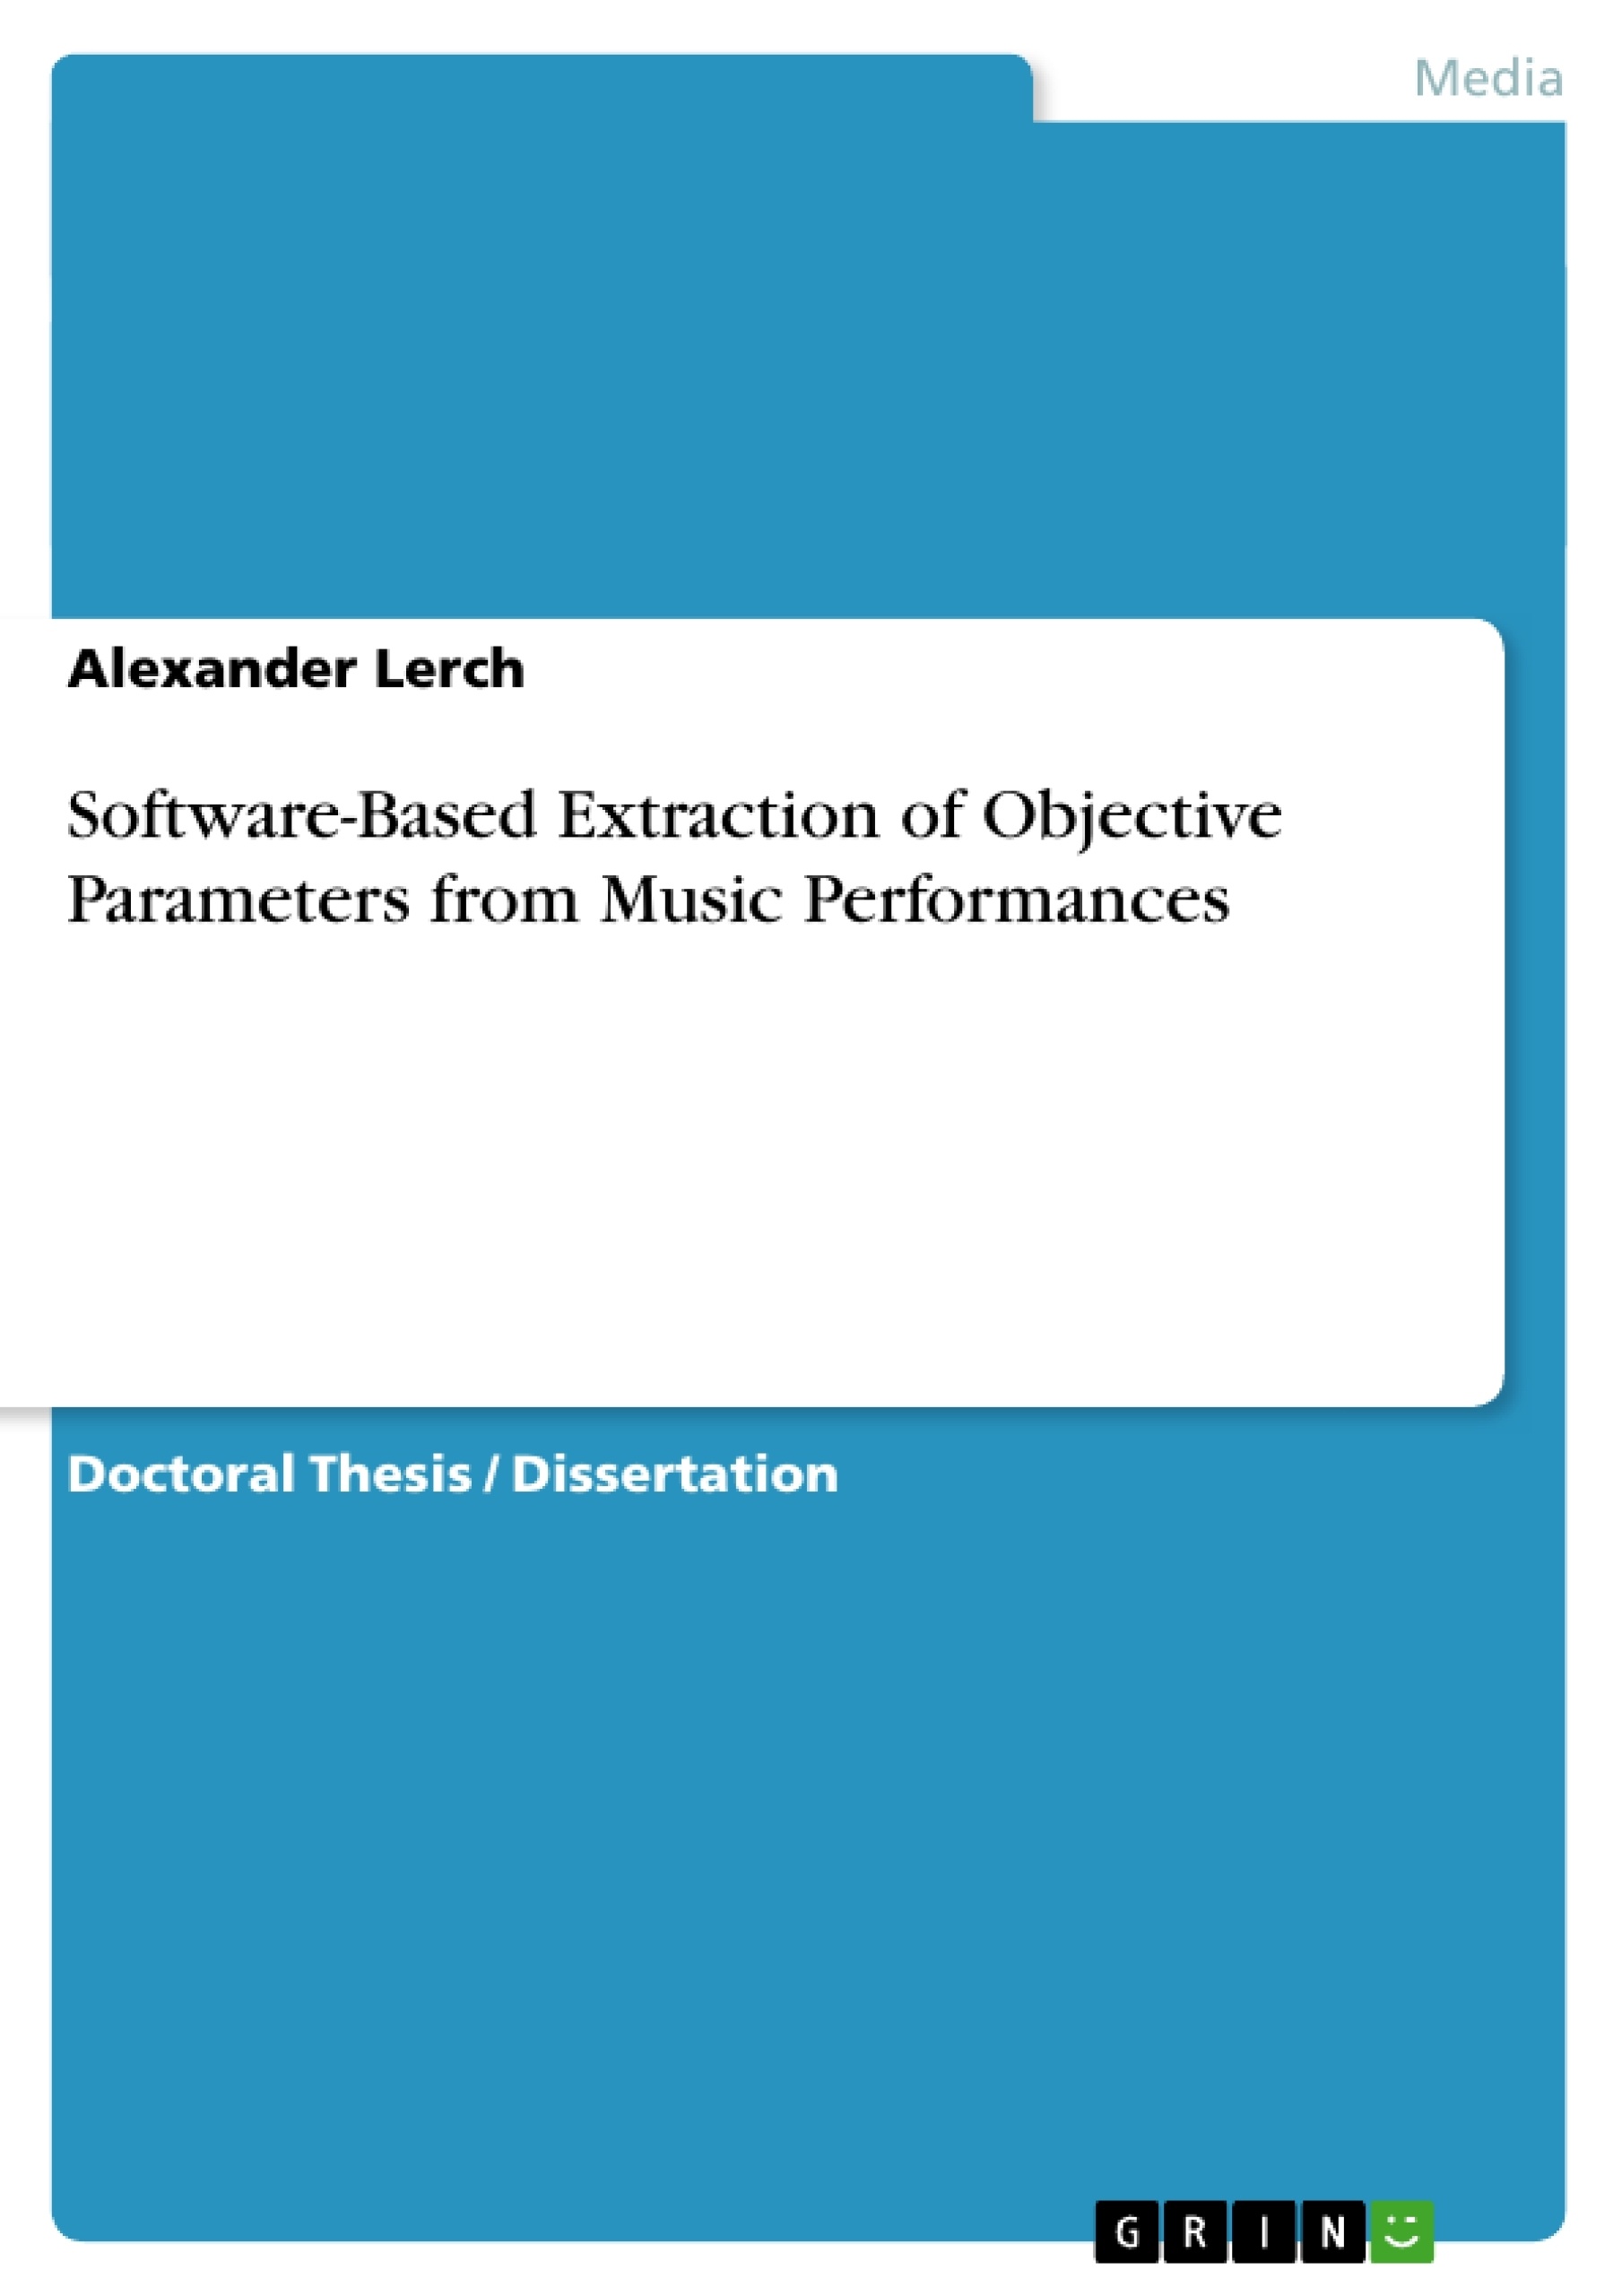 Title: Software-Based Extraction of Objective Parameters from Music Performances